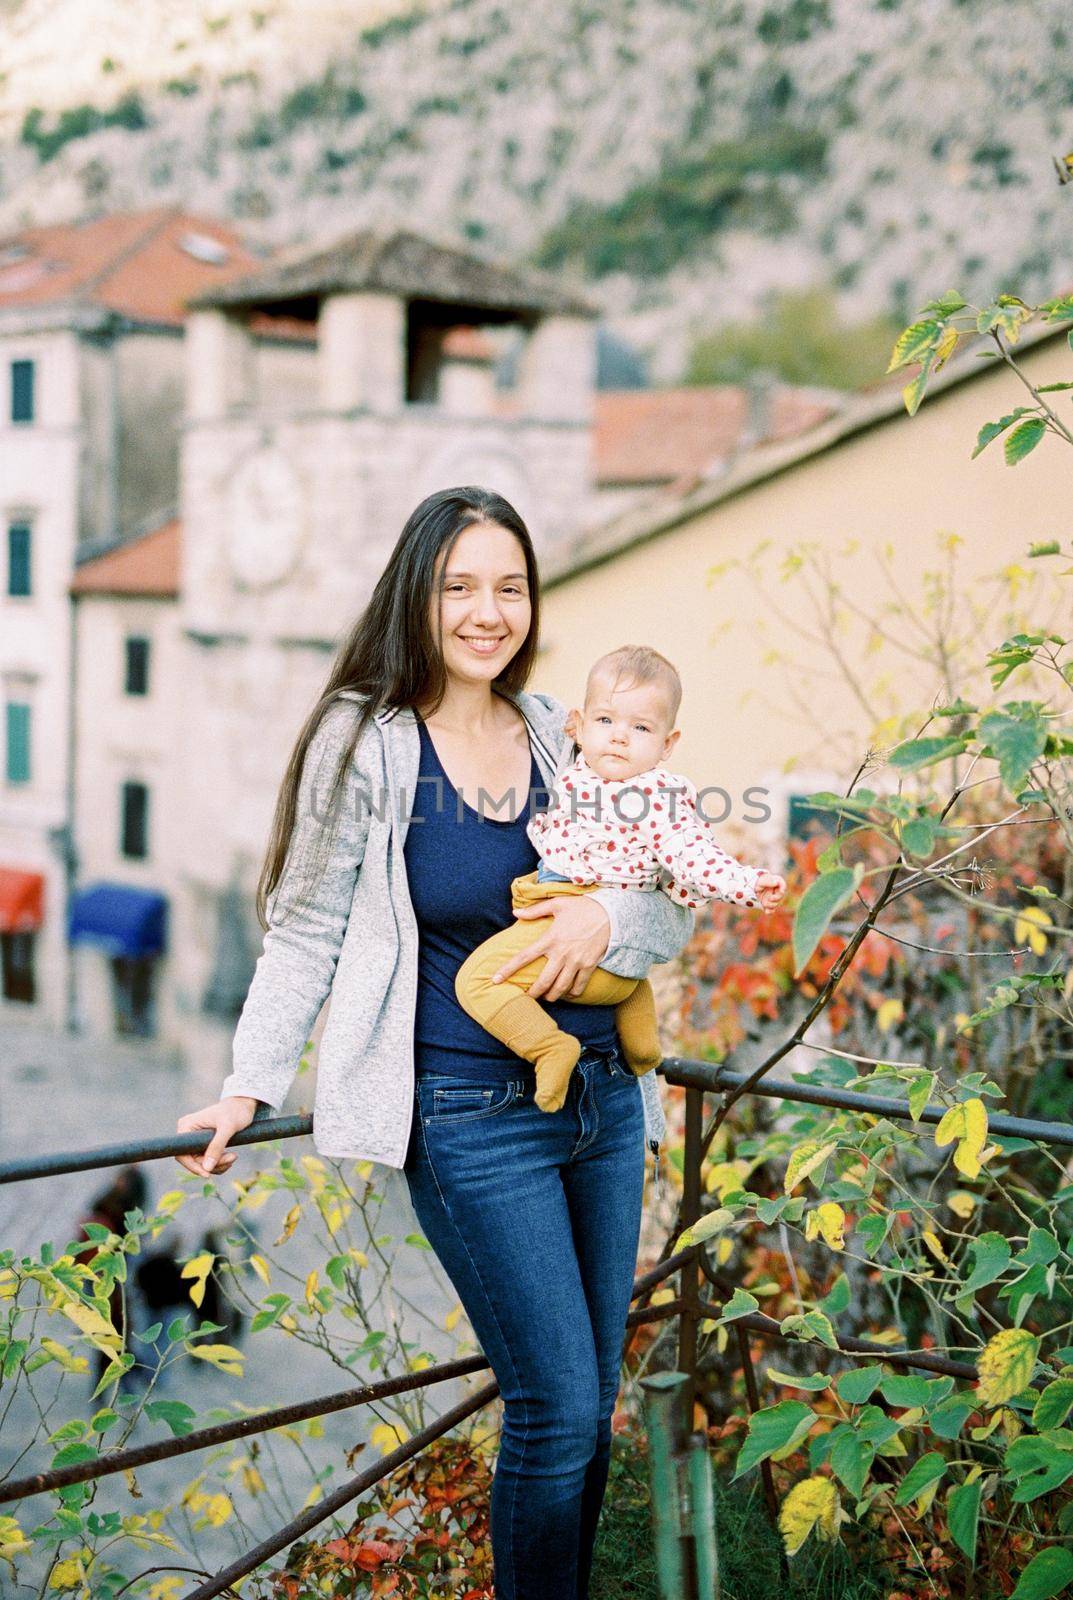 Mom with a baby in her arms stands on the balcony against the backdrop of old houses. High quality photo